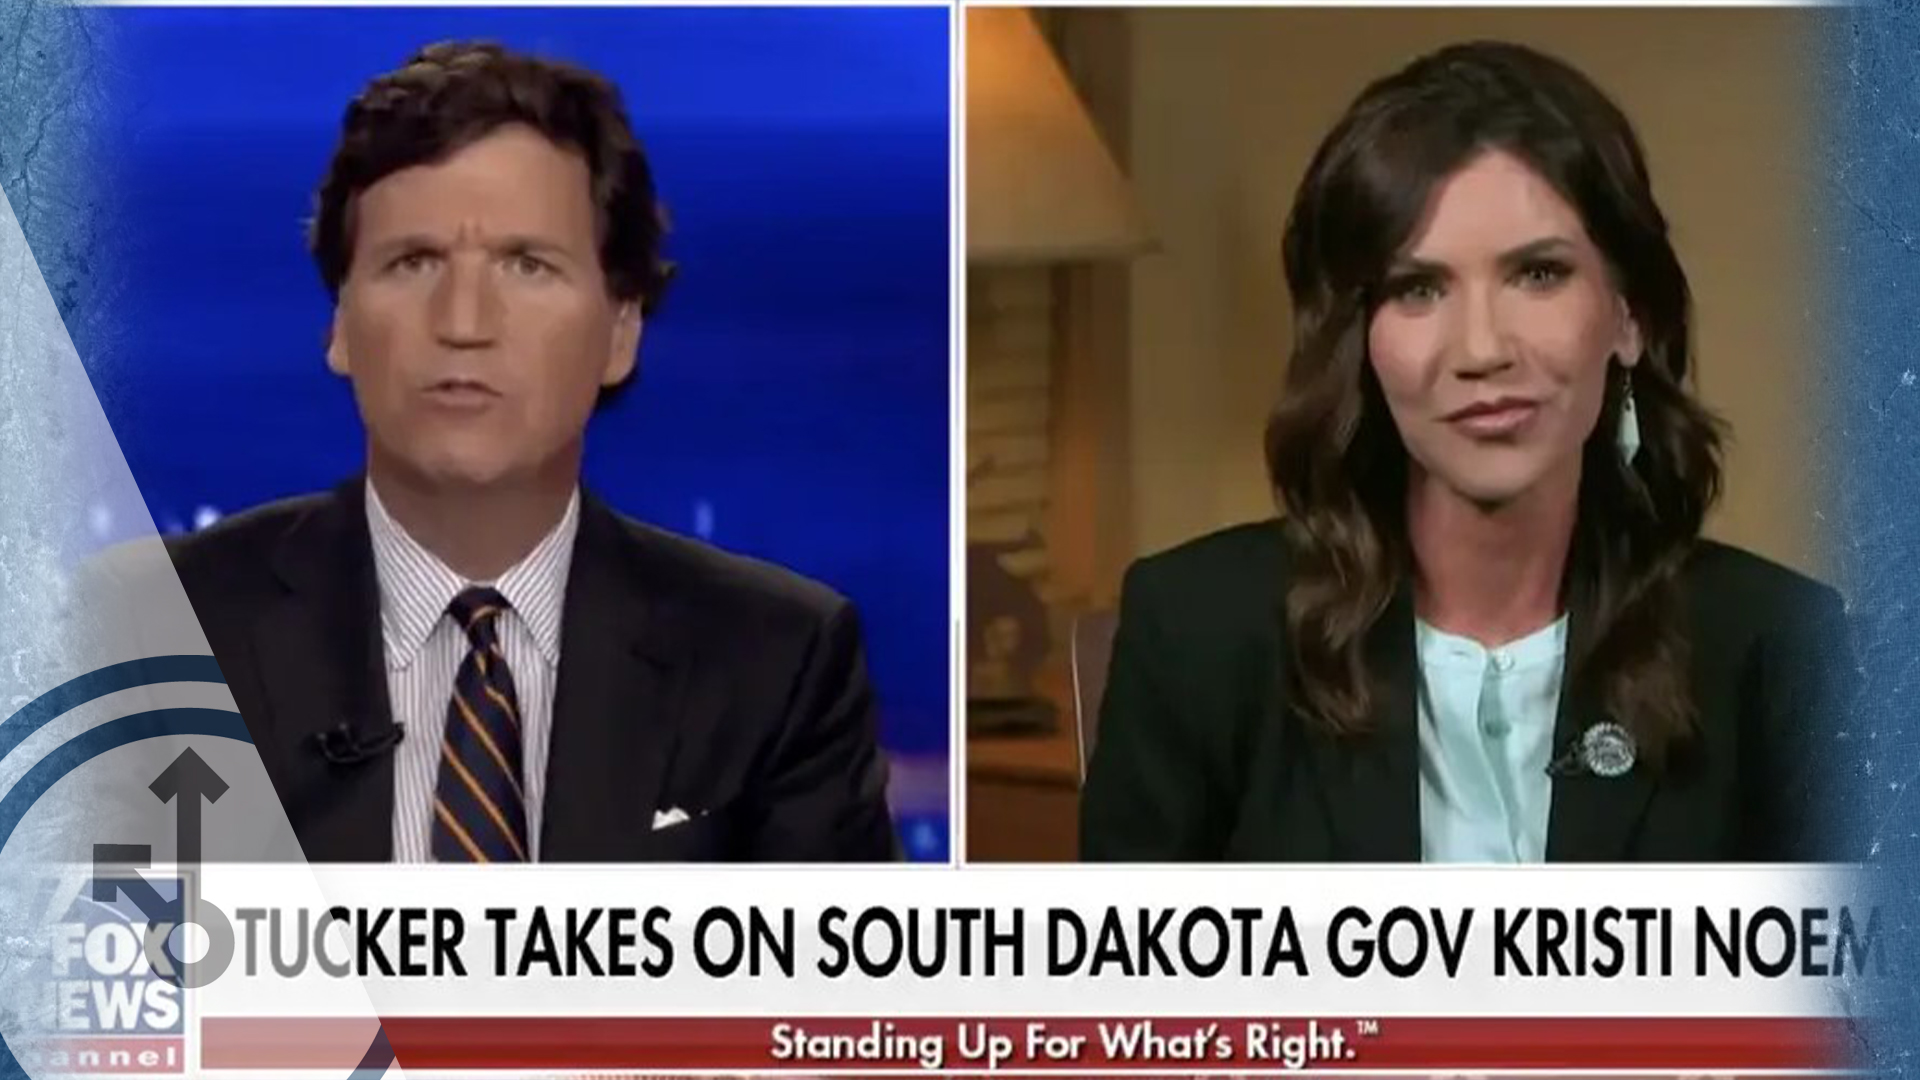 National Response To Noem's Title IX Fight, And How Regular Citizens Can Combat Climate Change